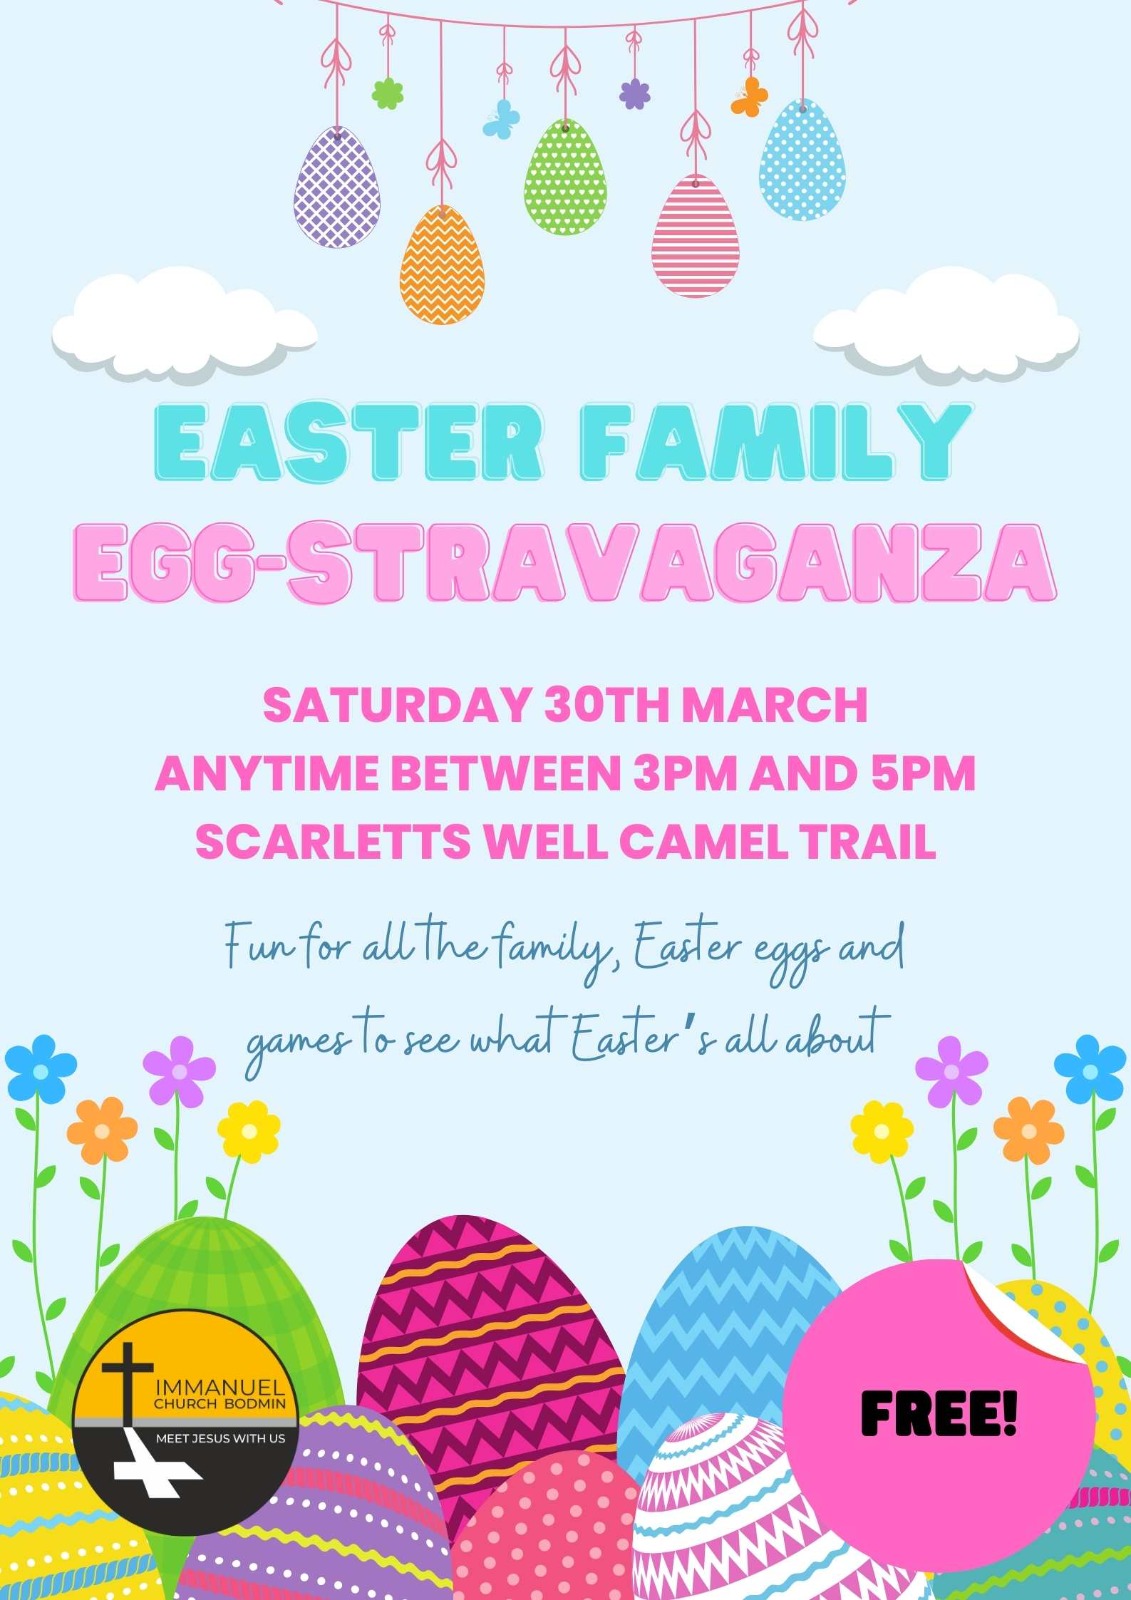 Easter Family Egg-Stravaganza